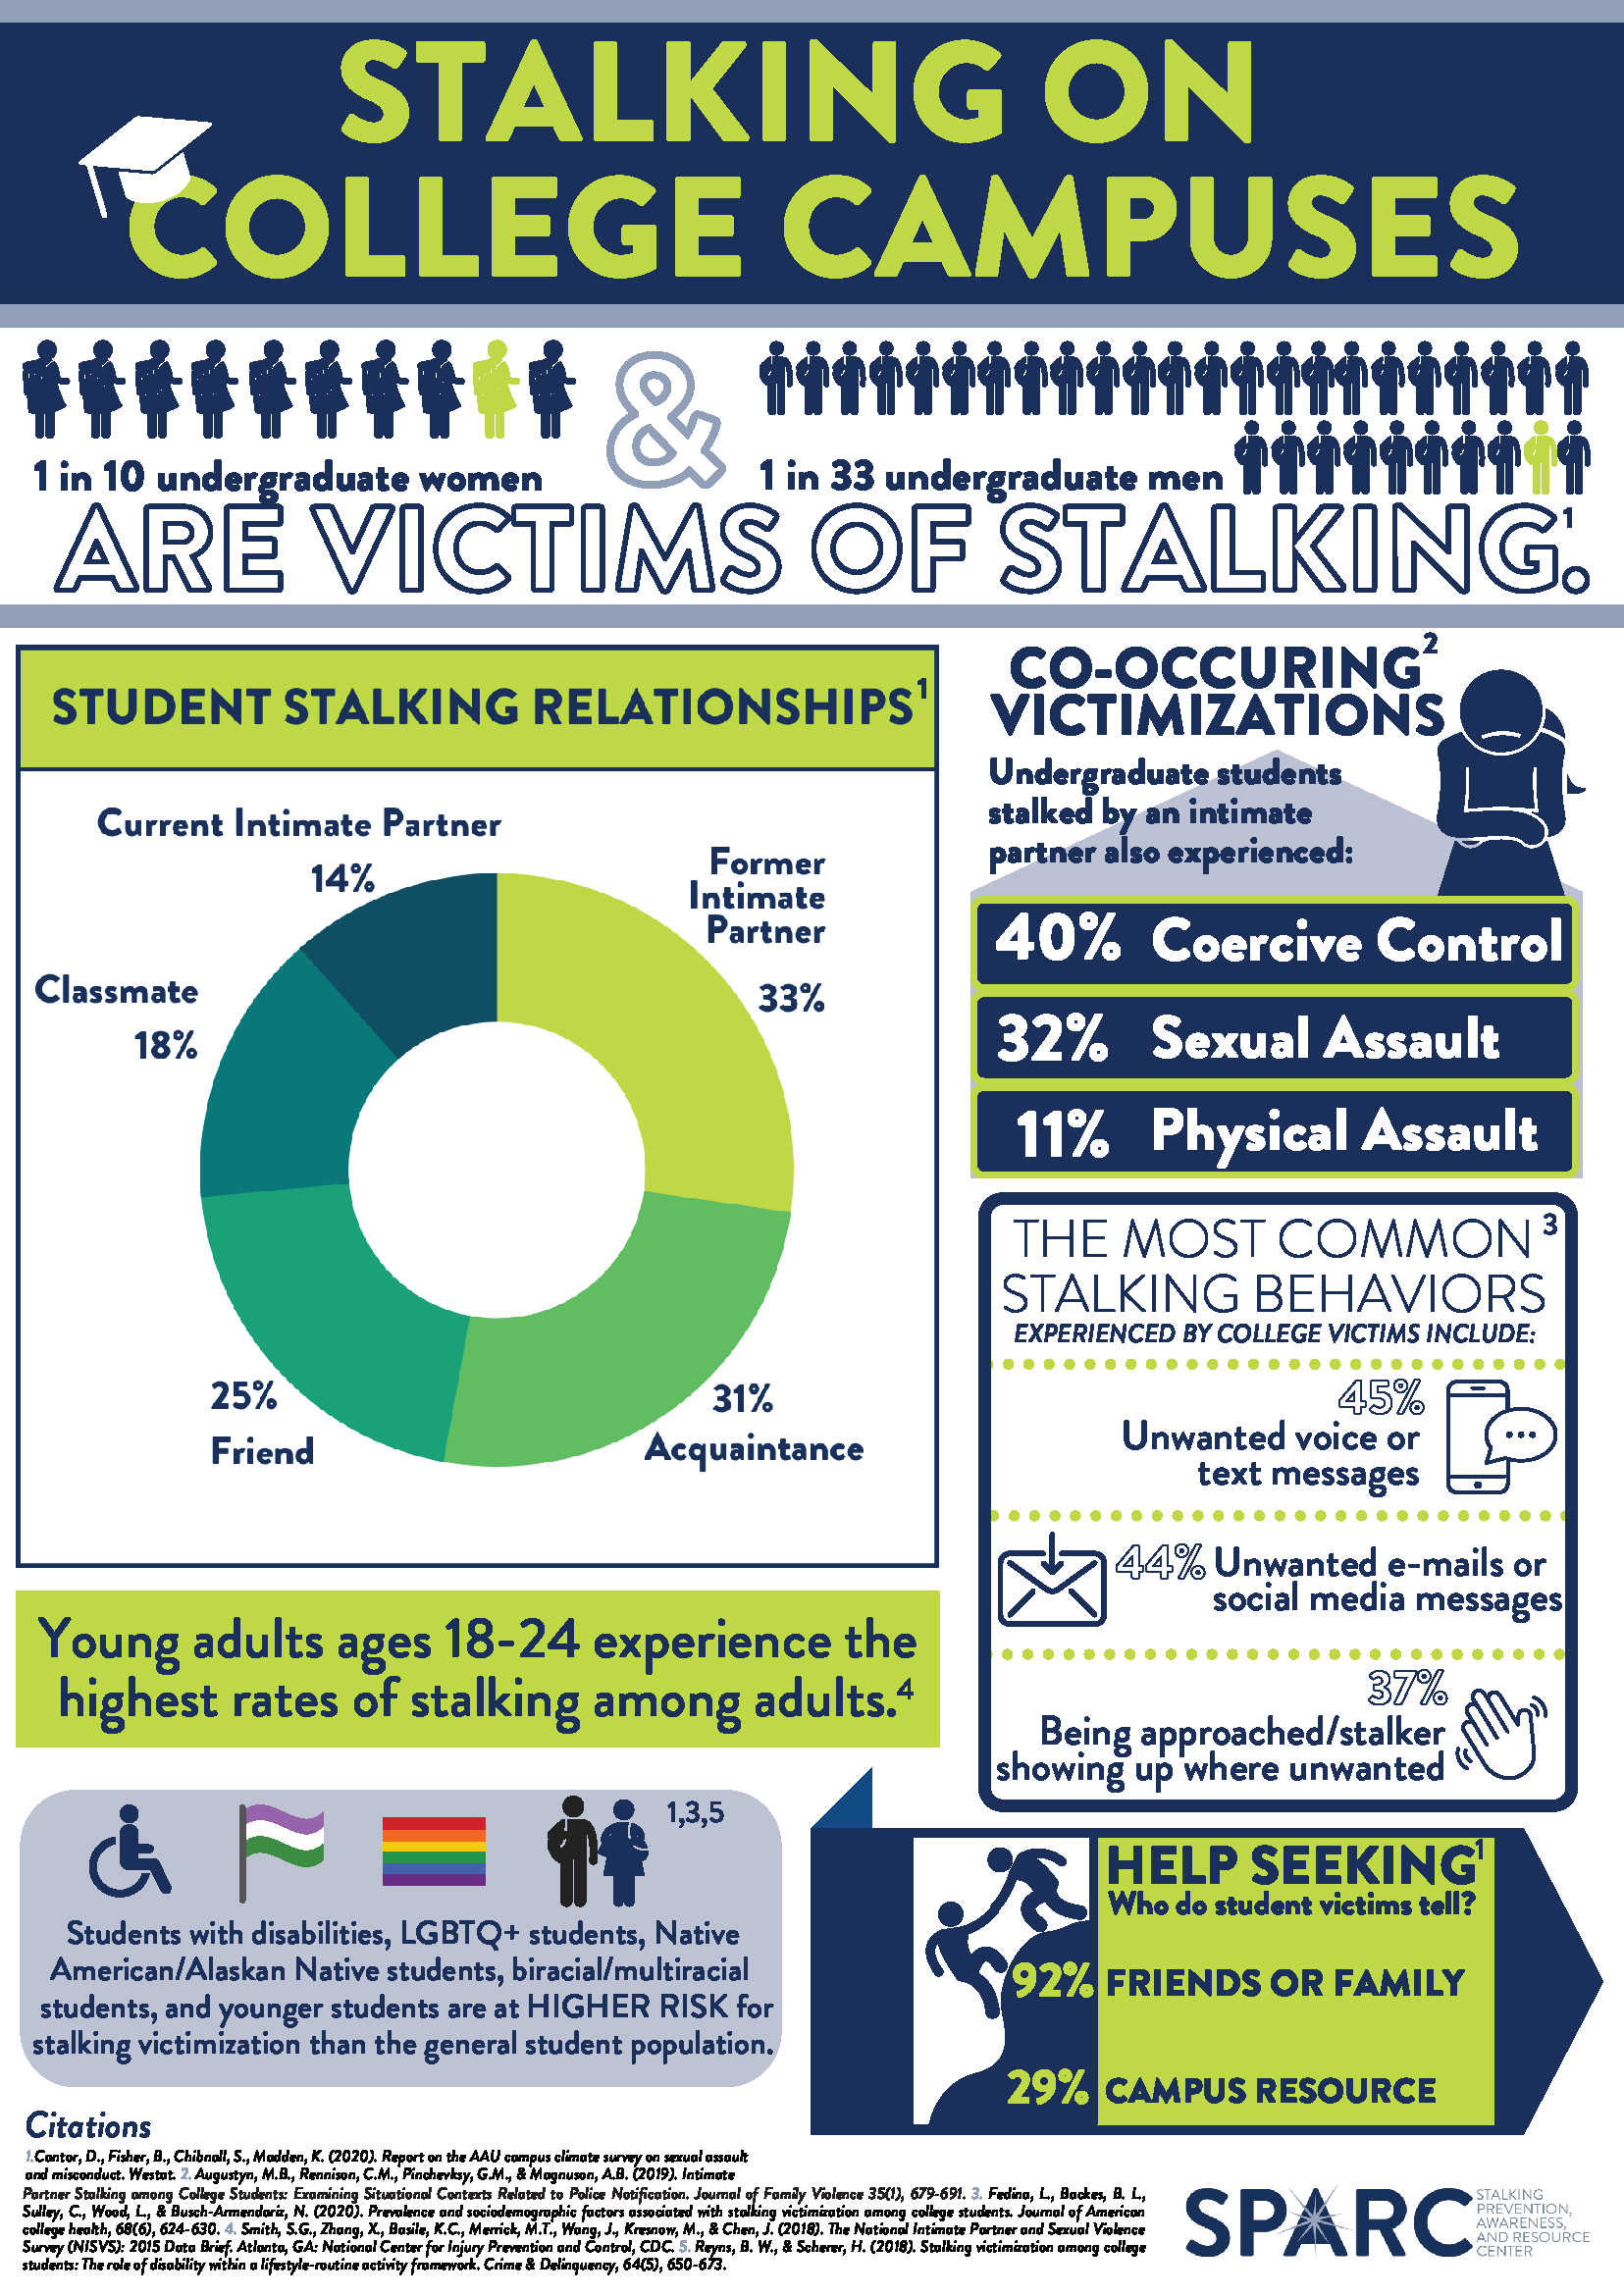 Stalking on College Campuses. From Stalking Prevention, Awareness and Resource Center. 1 in 10 undergraduate women are victims of stalking. 1 in 33 undergraduate men are victims of stalking (see citation i). Student Stalking Relationships (see citation ii): 14% Current Intimate Partner, 18% Classmate, 33% Former Intimate Partner, 31% Acquaintance, 25% Friend. Co-occurring Victimizations (see citation iii): 40% Coercive Control, 32% Sexual Assault, 11% Physical Assault. The Most Common Stalking Behaviors (see citation iv) – experienced by college victims include: 45% unwanted voice or text messages, 44% unwanted emails or social media messages, 37% being approached/stalked showing up where unwanted. Young adults ages 18 – 24 experience the highest rates of stalking among adults (see citation v).  Students with disabilities, LGBTQ+ students, biracial/multiracial students, and younger students are at HIGHER RISK for stalking victimization than the general student population. (See citations i, iii, vi). Help Seeking (see citation i). Who do student victims tell? 92% friends or family. 29% campus resource. Citations: i - Cantor, D., Fisher, B., Chibnall, S. Madden, K. (2020) Report on the AAU campus climate survey on sexual assault and misconduct. Westat. ii - Cantor, D., Fisher, B., Chibnall, S. Madden, K. (2020) Report on the AAU campus climate survey on sexual assault and misconduct. Westat. iii - Augustyn, M.B., Rennison, C.M., Pinchevksy, G.M. & Magnuson, A.B. (2019).  Intimate Partner Stalking among College Students: Examining Situational Contexts Related to Police Notification, Journal of Family Violence 35(1), 679-691. iv - Fedina, L., Backers, B.L., Sulley, C., Wood, L., & Busch-Armedariz, N. (2020), Prevalence and sociodemographic factors associated with stalking victimization among college students.  Journal of American College Health, 68(6), 624-630. v - Smith, S.G., Zhang, X., Basile, K. C., Merrick, M.T., Wang, J., Kresnow, M. & Chen, J. (2018). The National Partner Intimate Partner and Sexual Violence Survey (NISVS): 2015 Data Brief. Atlanta, GA: National Center for Injury Prevention and Control, CDC. vi - Reyns, B.W., & Scherer, H. (2018) Stalking victimization among college students: The role of disability within a lifestyle-routine activity framework.  Crime & Delinquency, 64(5), 650-673.